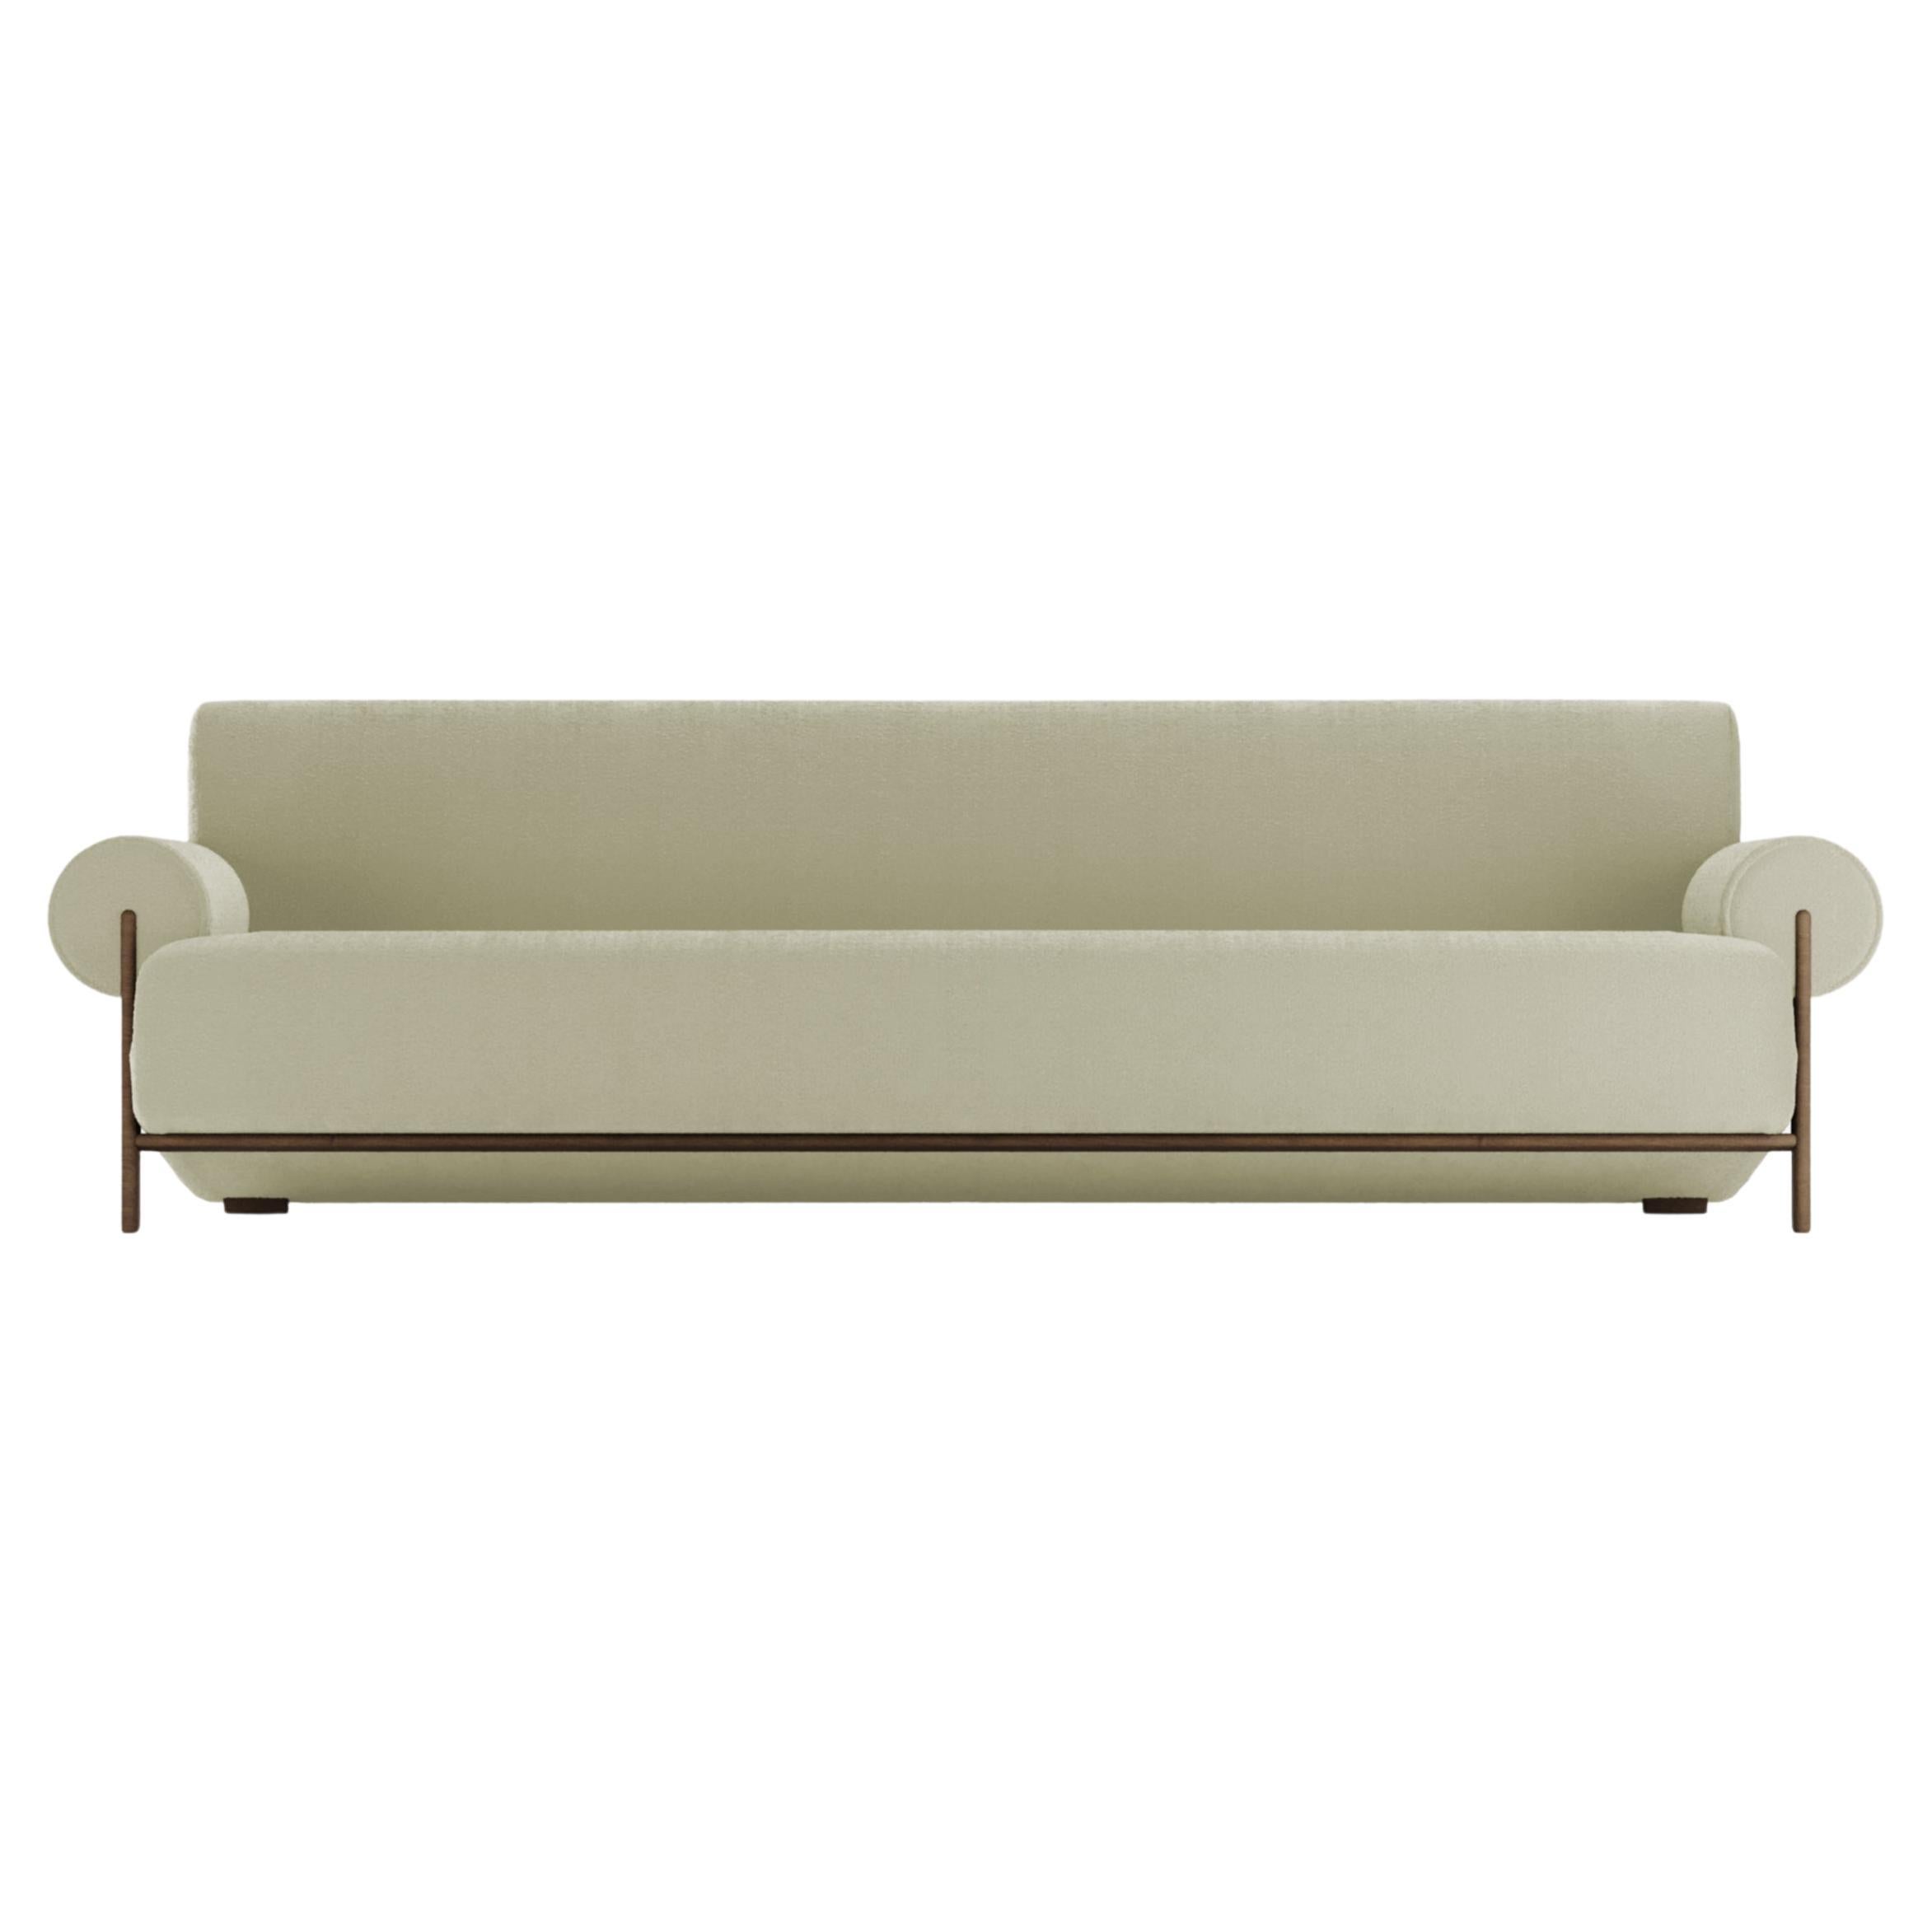 Contemporary Modern Paloma Sofa in Bouclé Beige by Collector For Sale